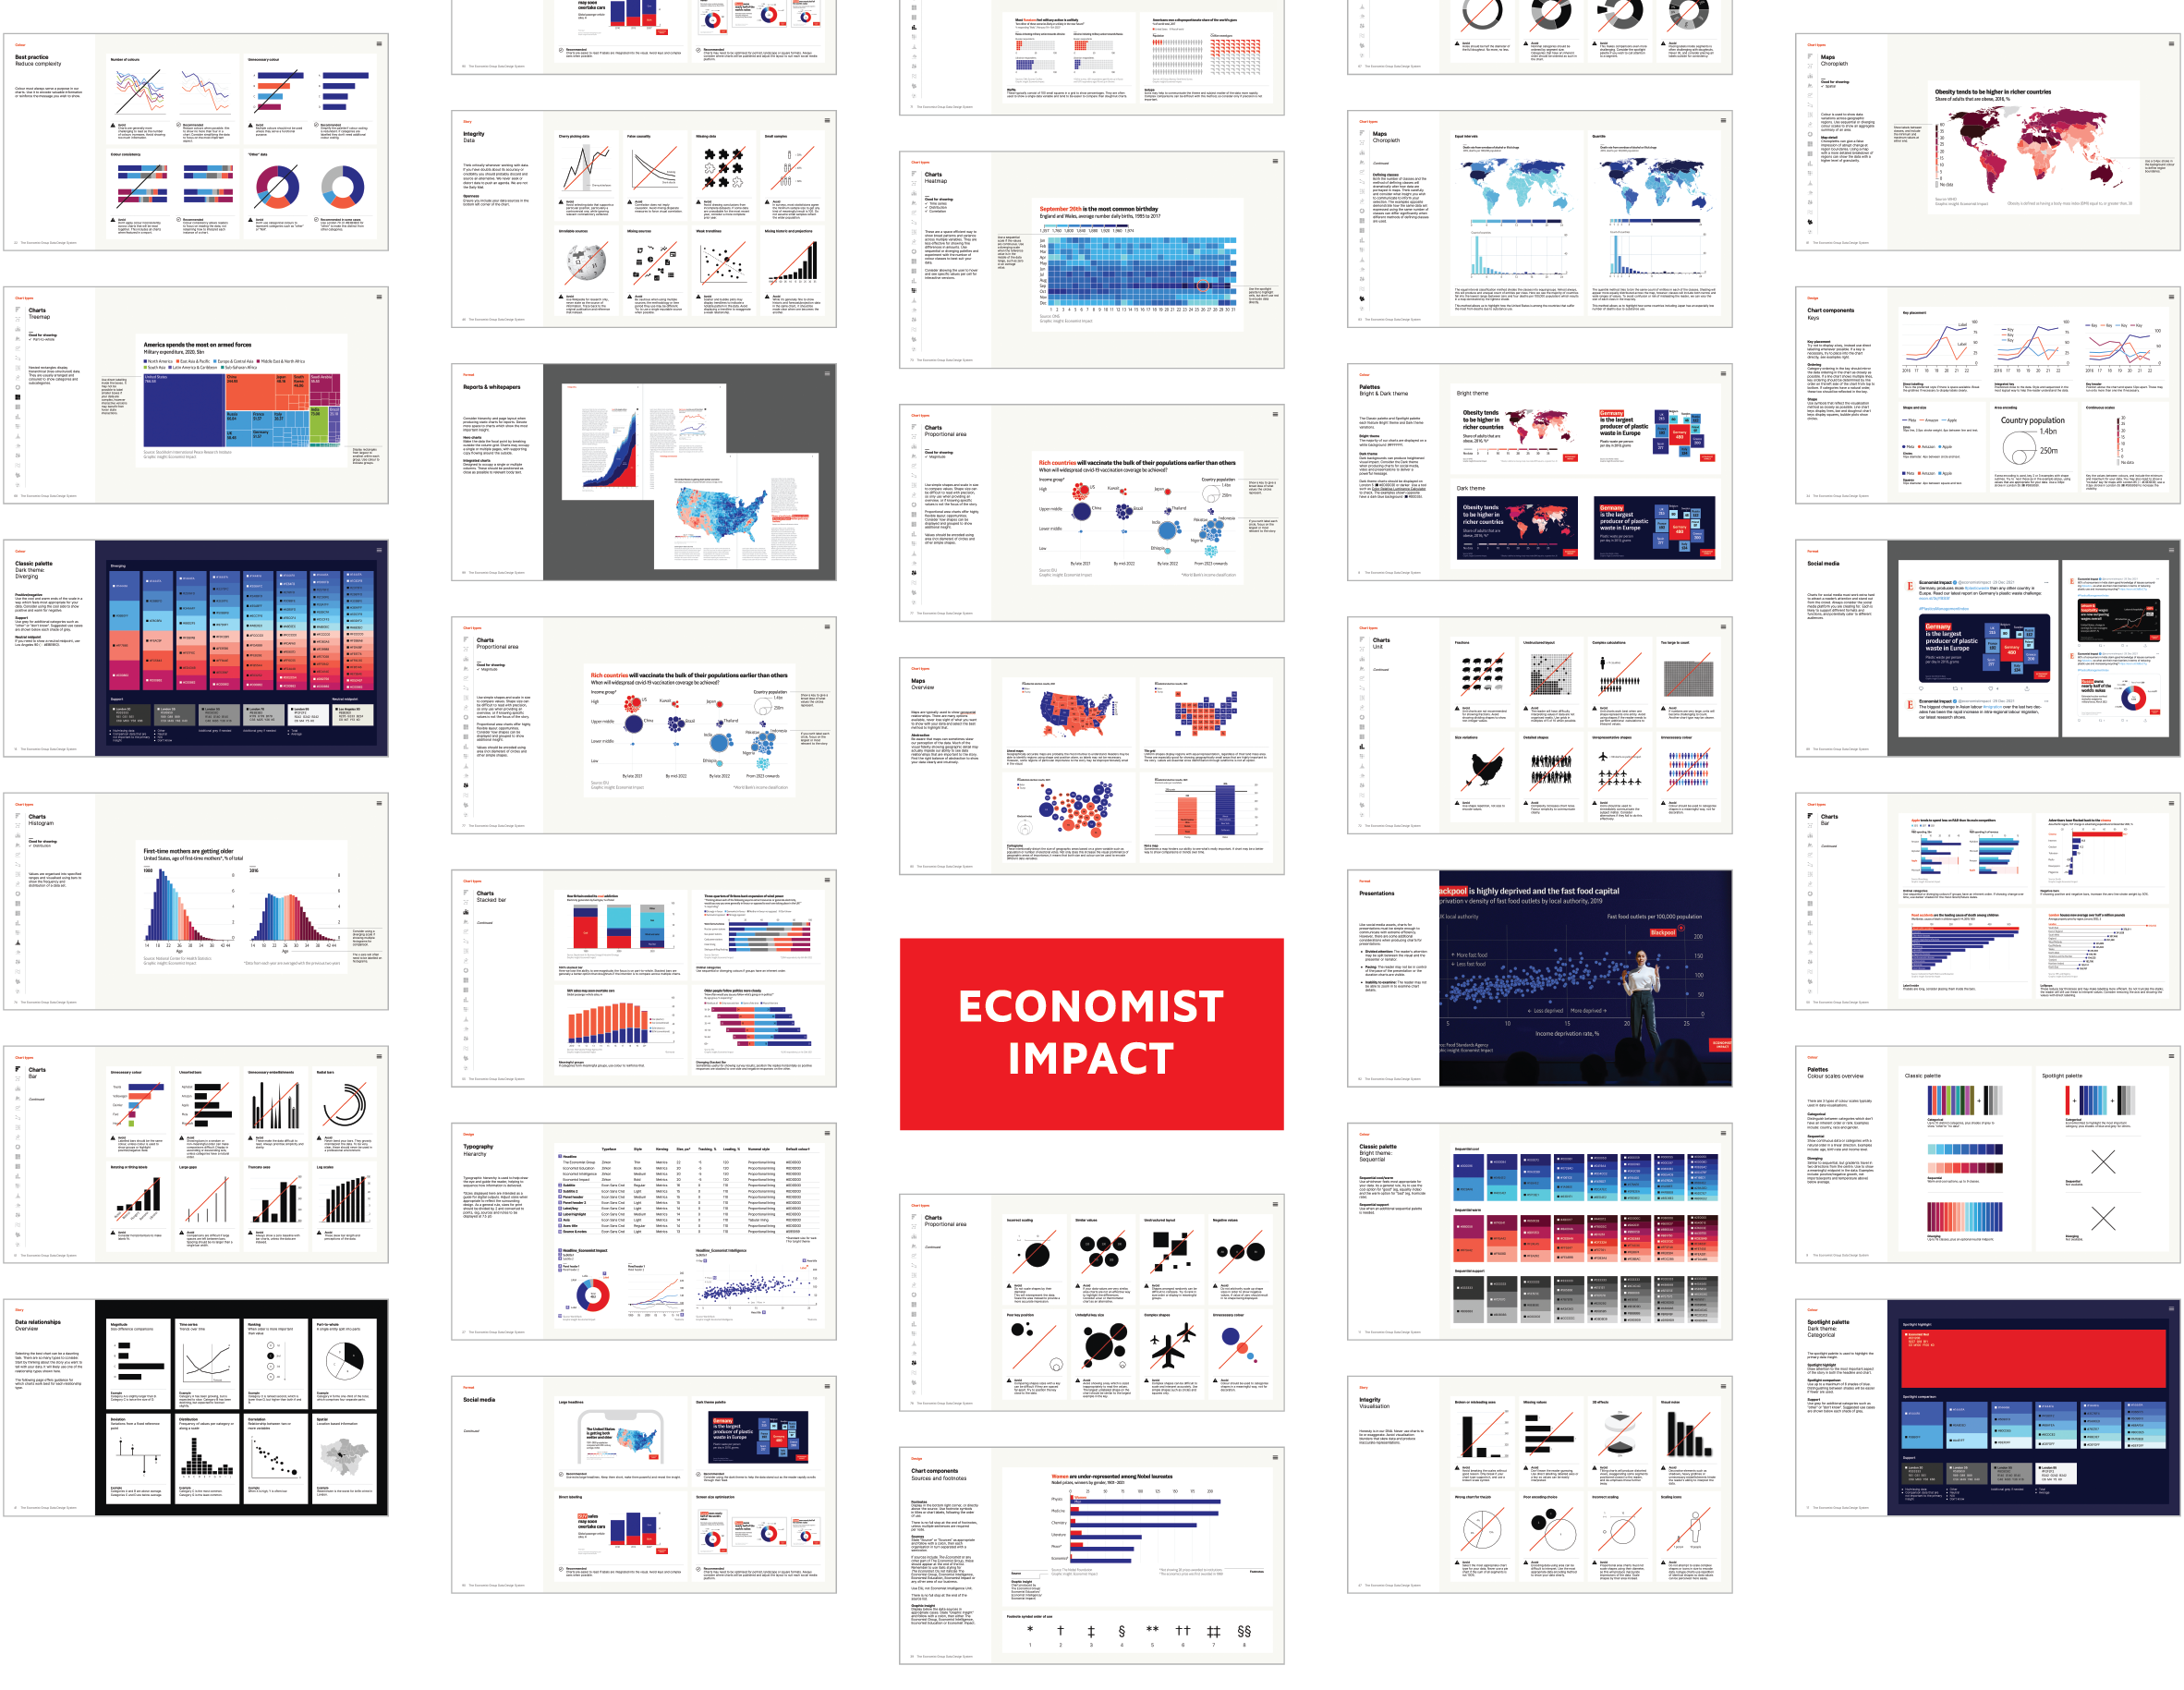 Grid showing dozens of screens from the Economist Impact data design system slide deck. Charts are not legible but are shown as small thumbnails, largely using shades of reds and blues to match the bright red of the Economist Impact logo.